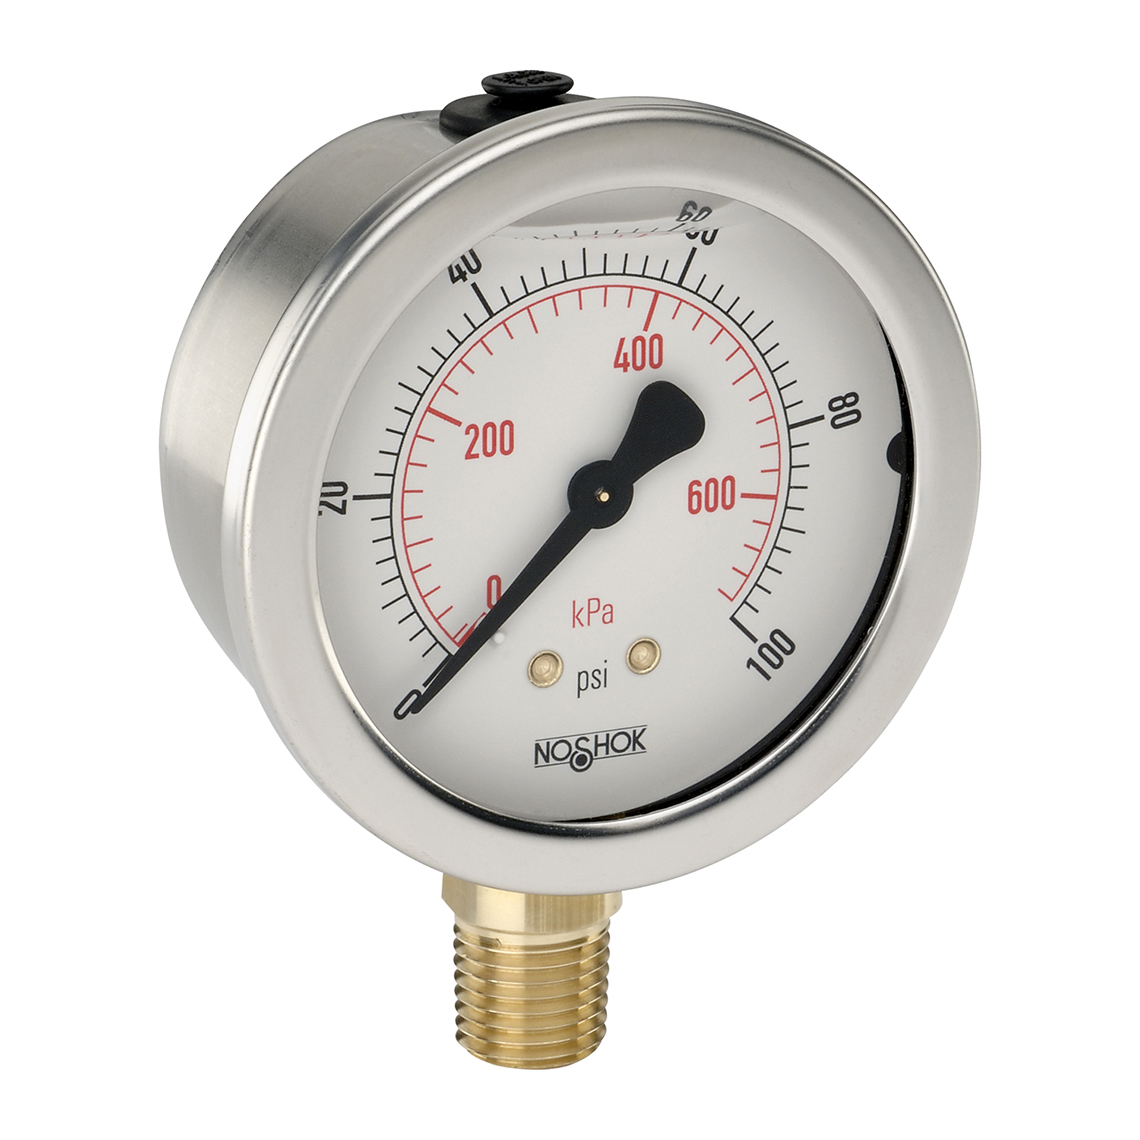 25-901-200-psi/kPa-GY40 900 Series ABS and Stainless Steel Liquid Filled Pressure Gauges